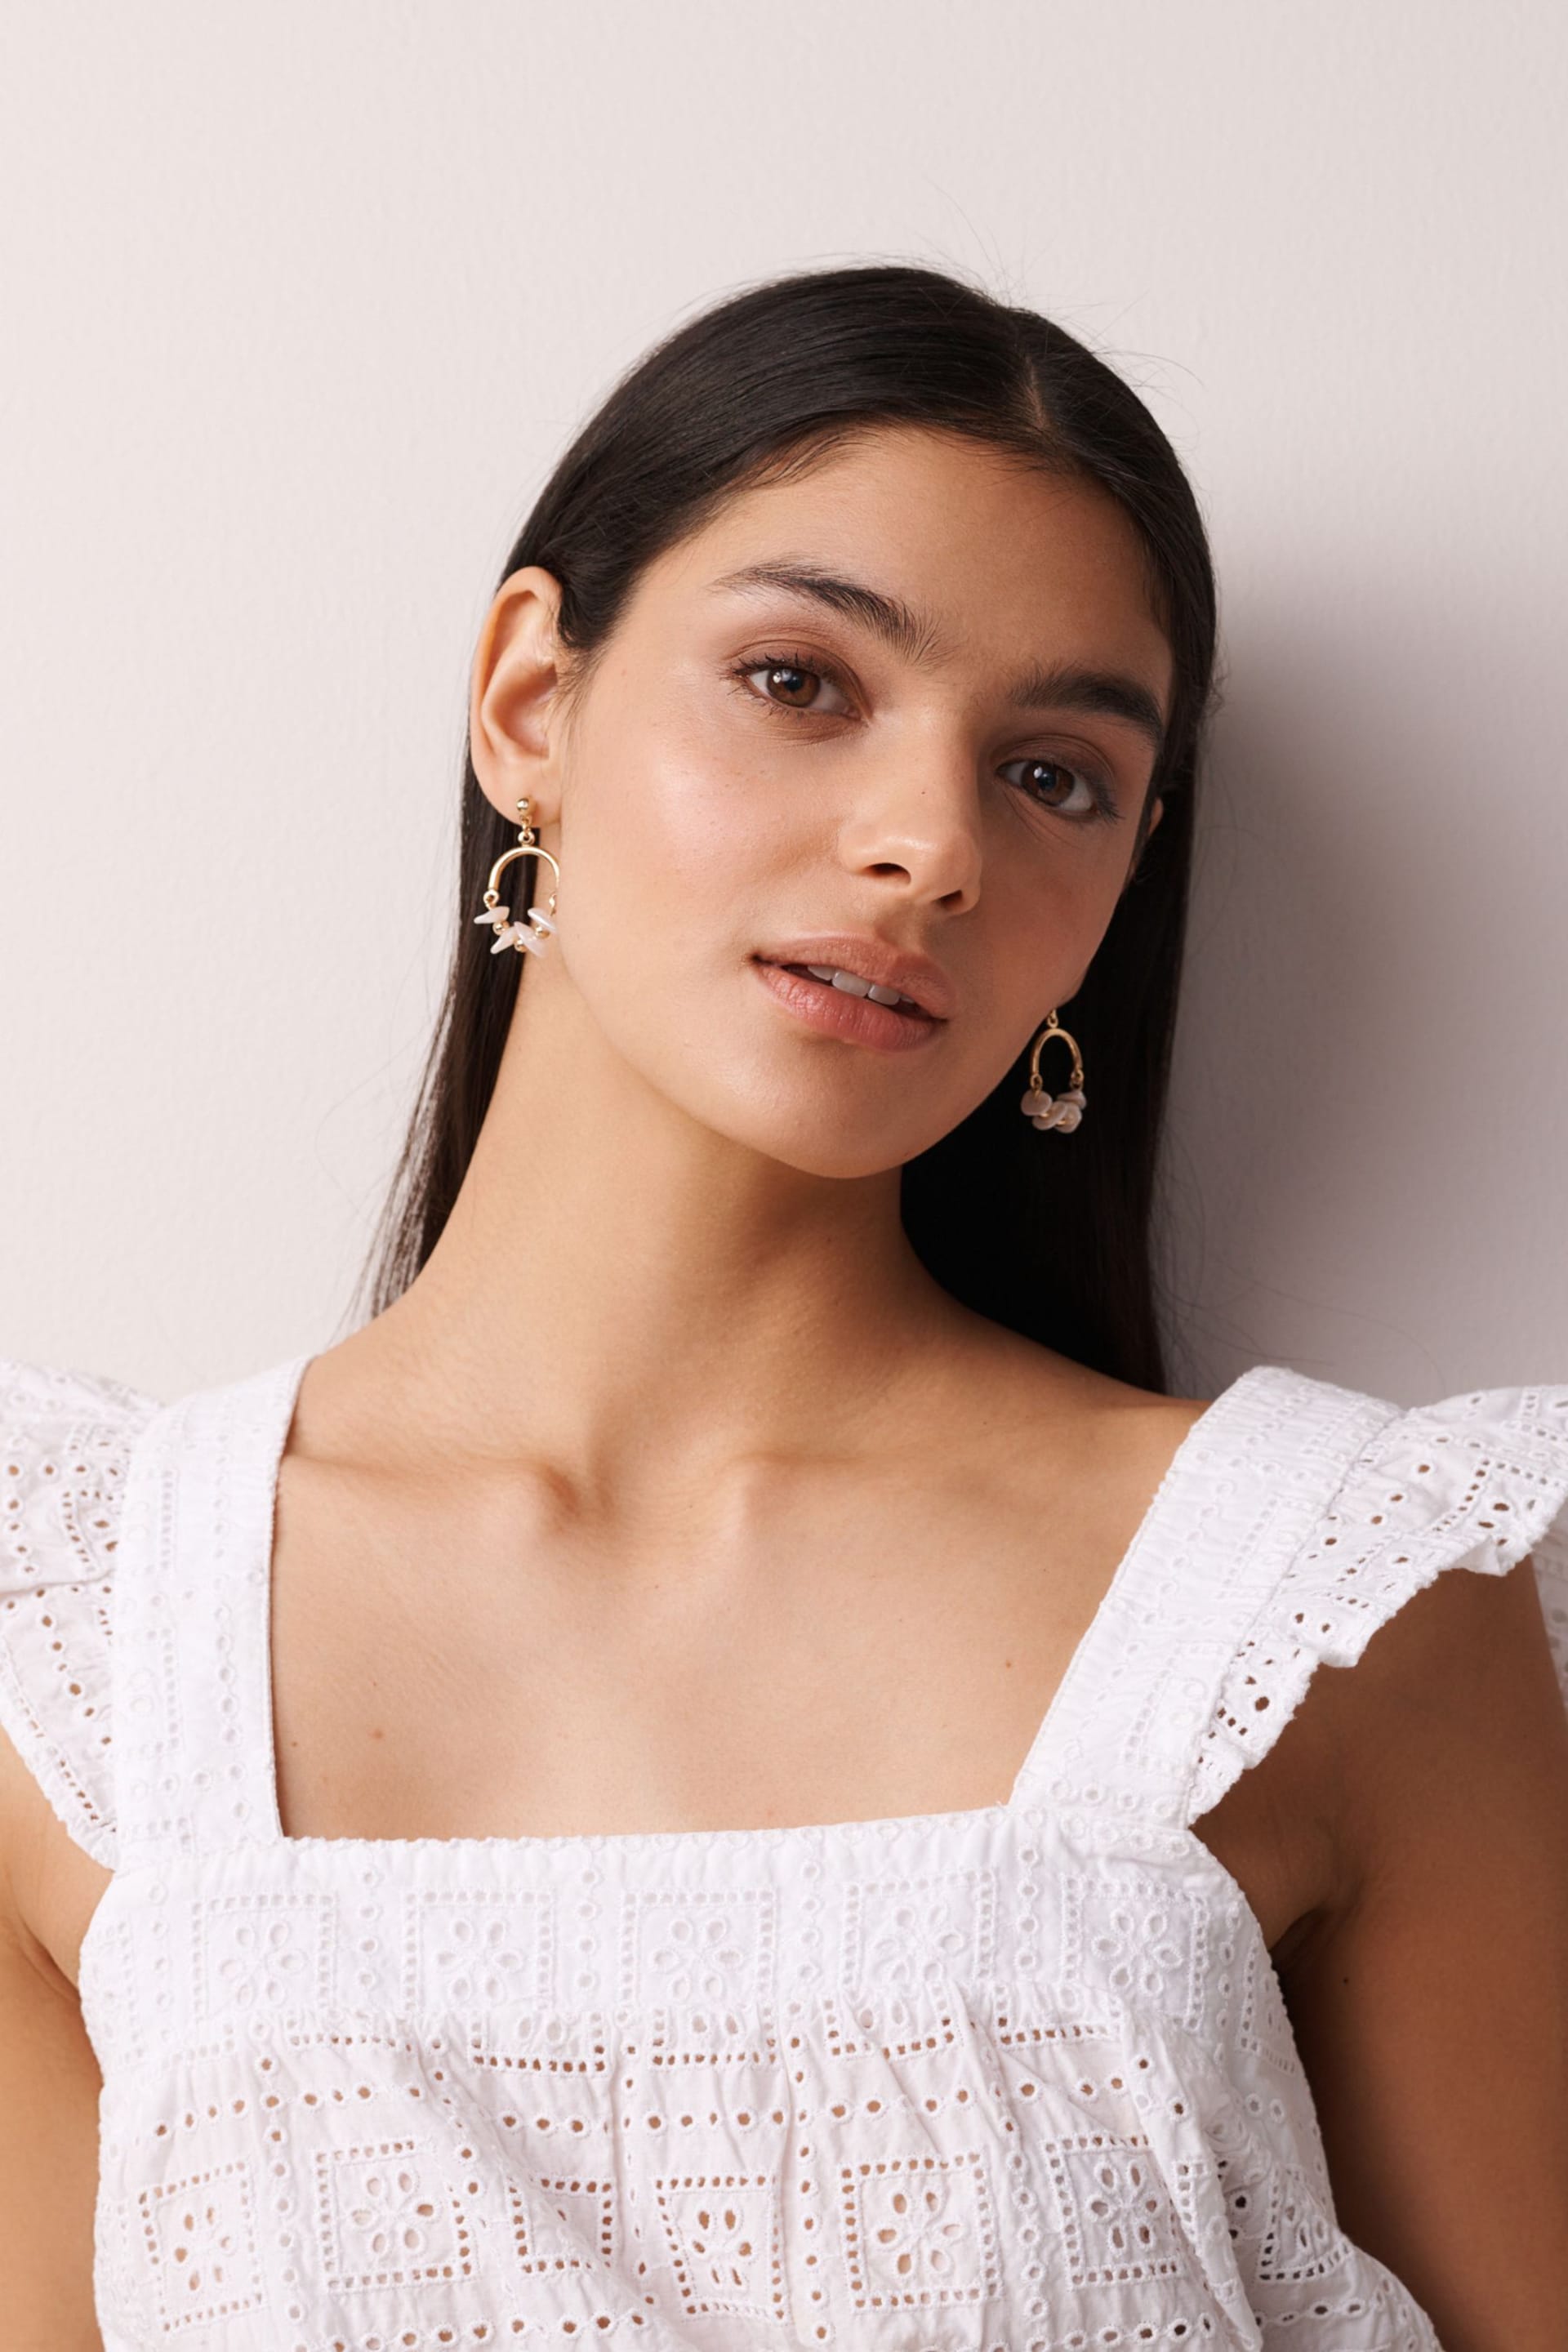 White Broderie Frill Sleeve Embroidered Cami Top - Image 4 of 6